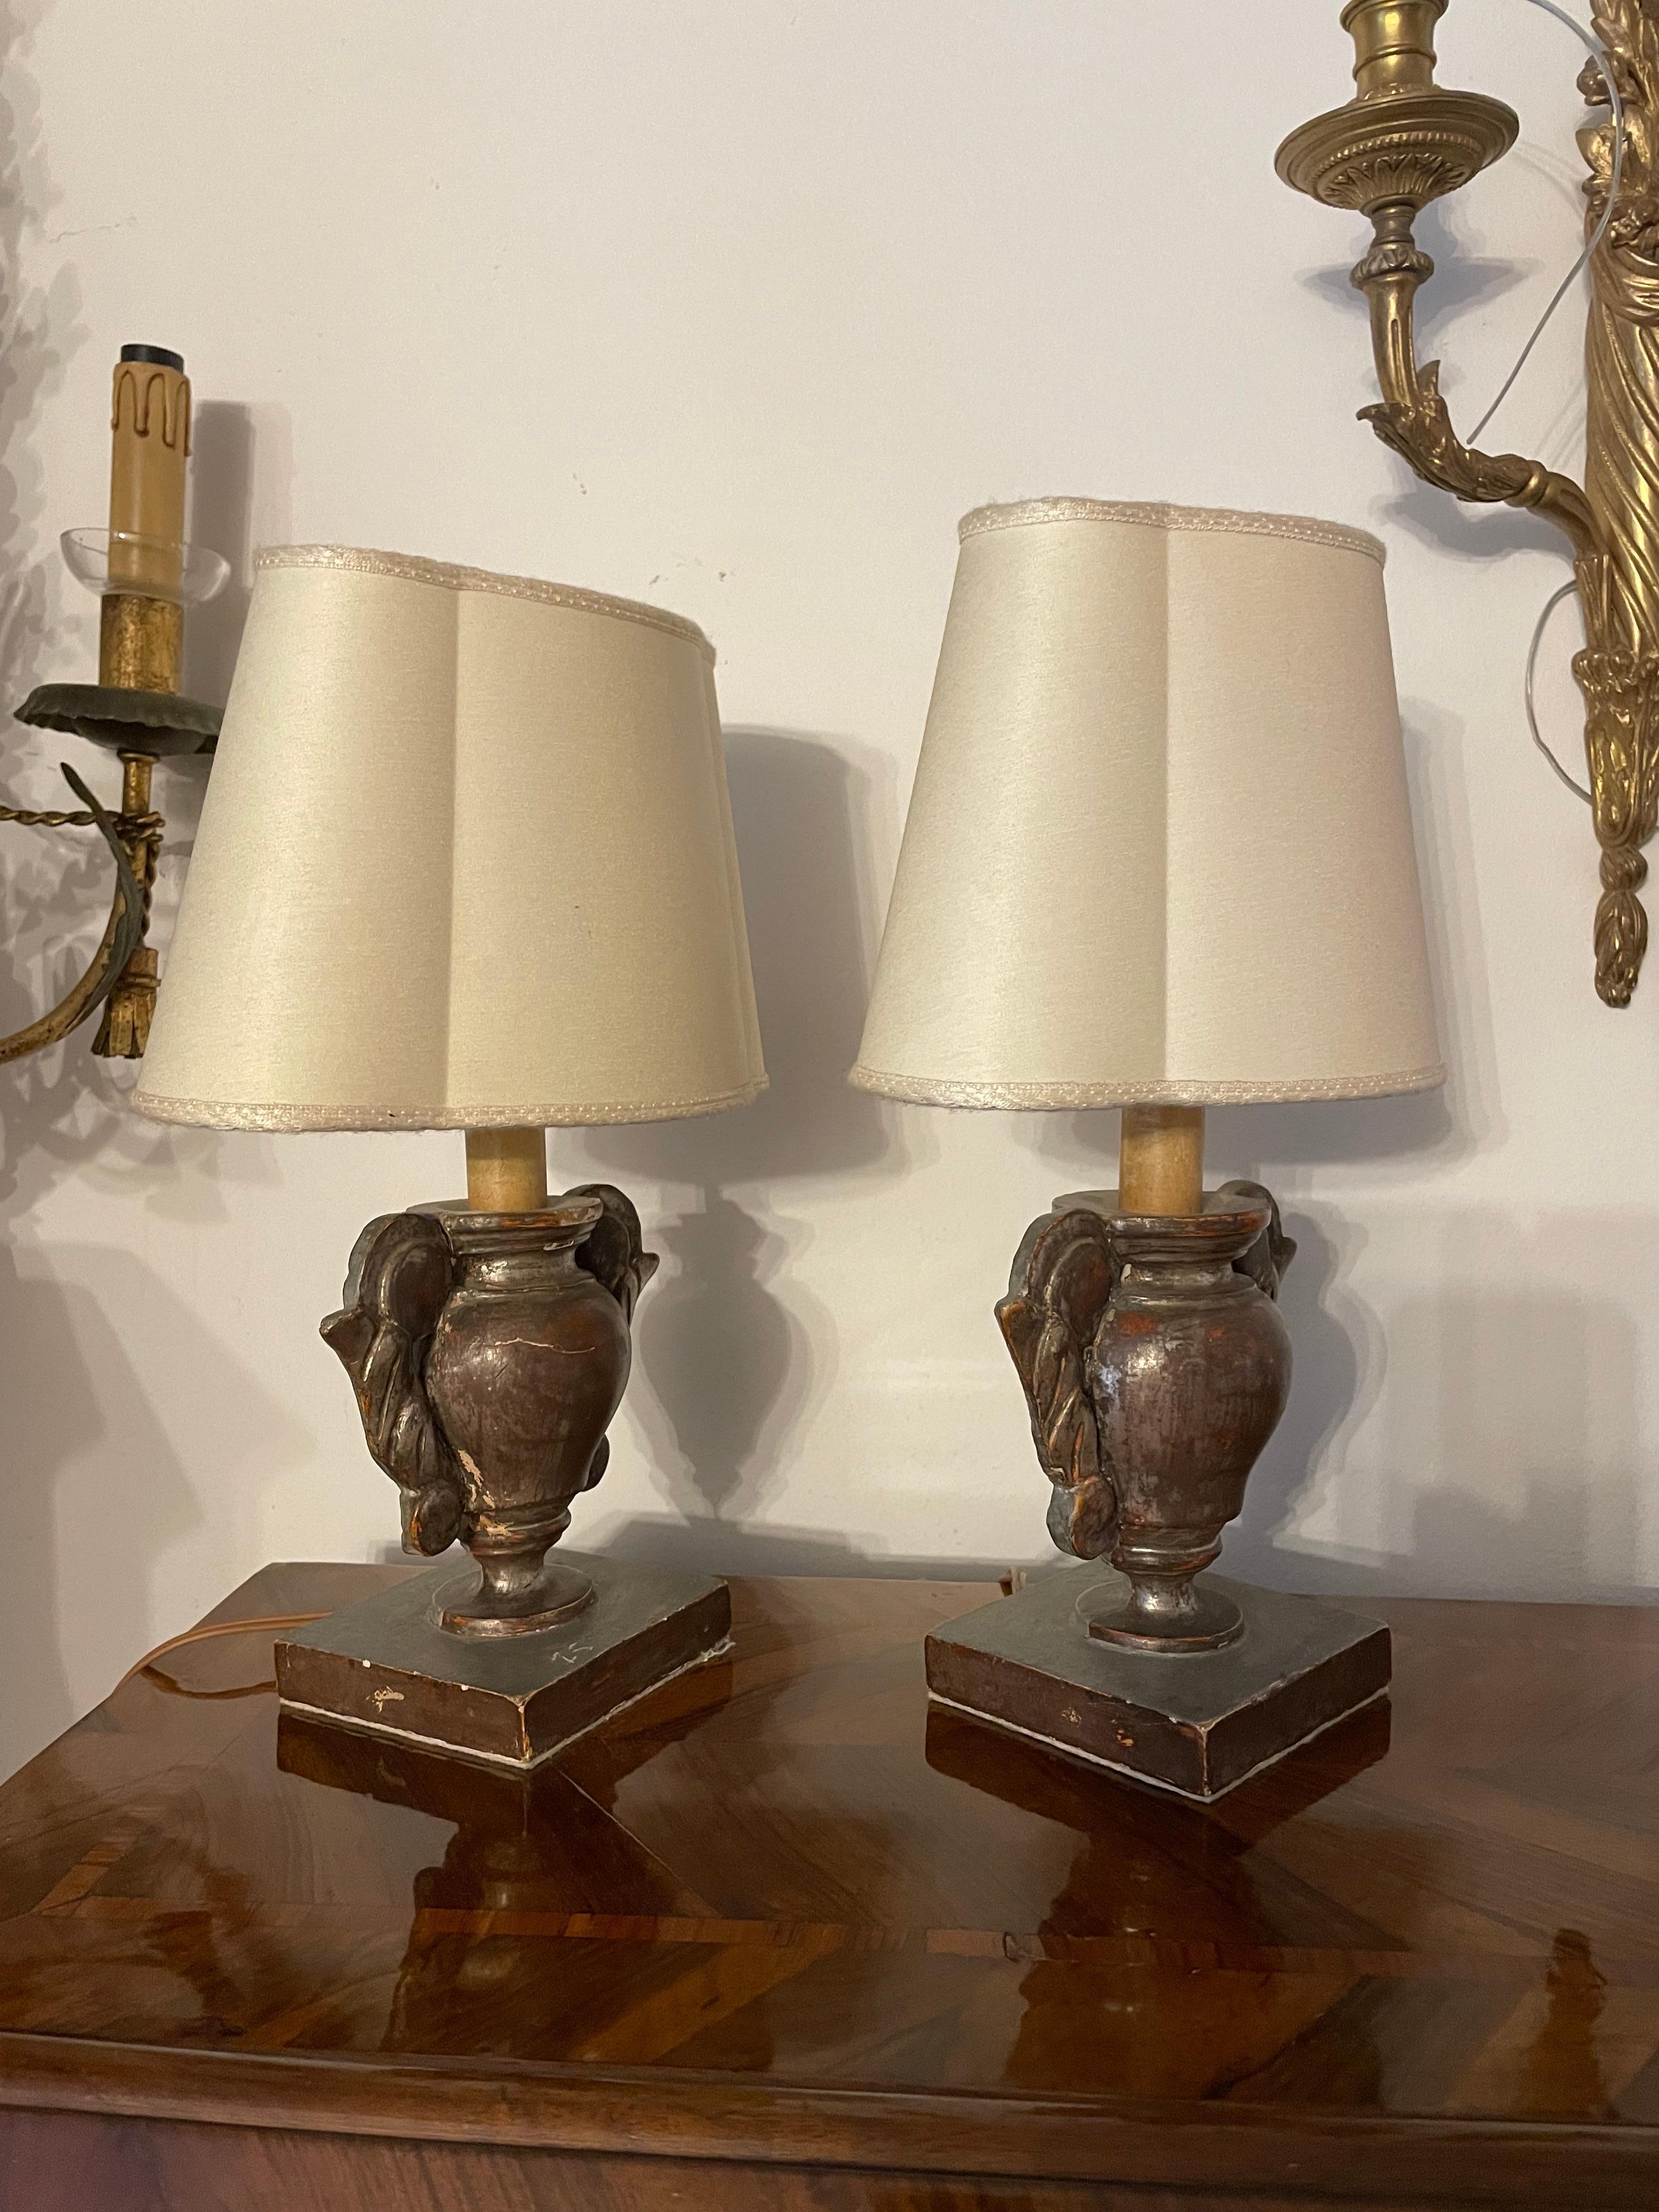 Turned Pair of Italian Table Lamps 19th Century Pair of Dark Silver-Leaf Carved Vases